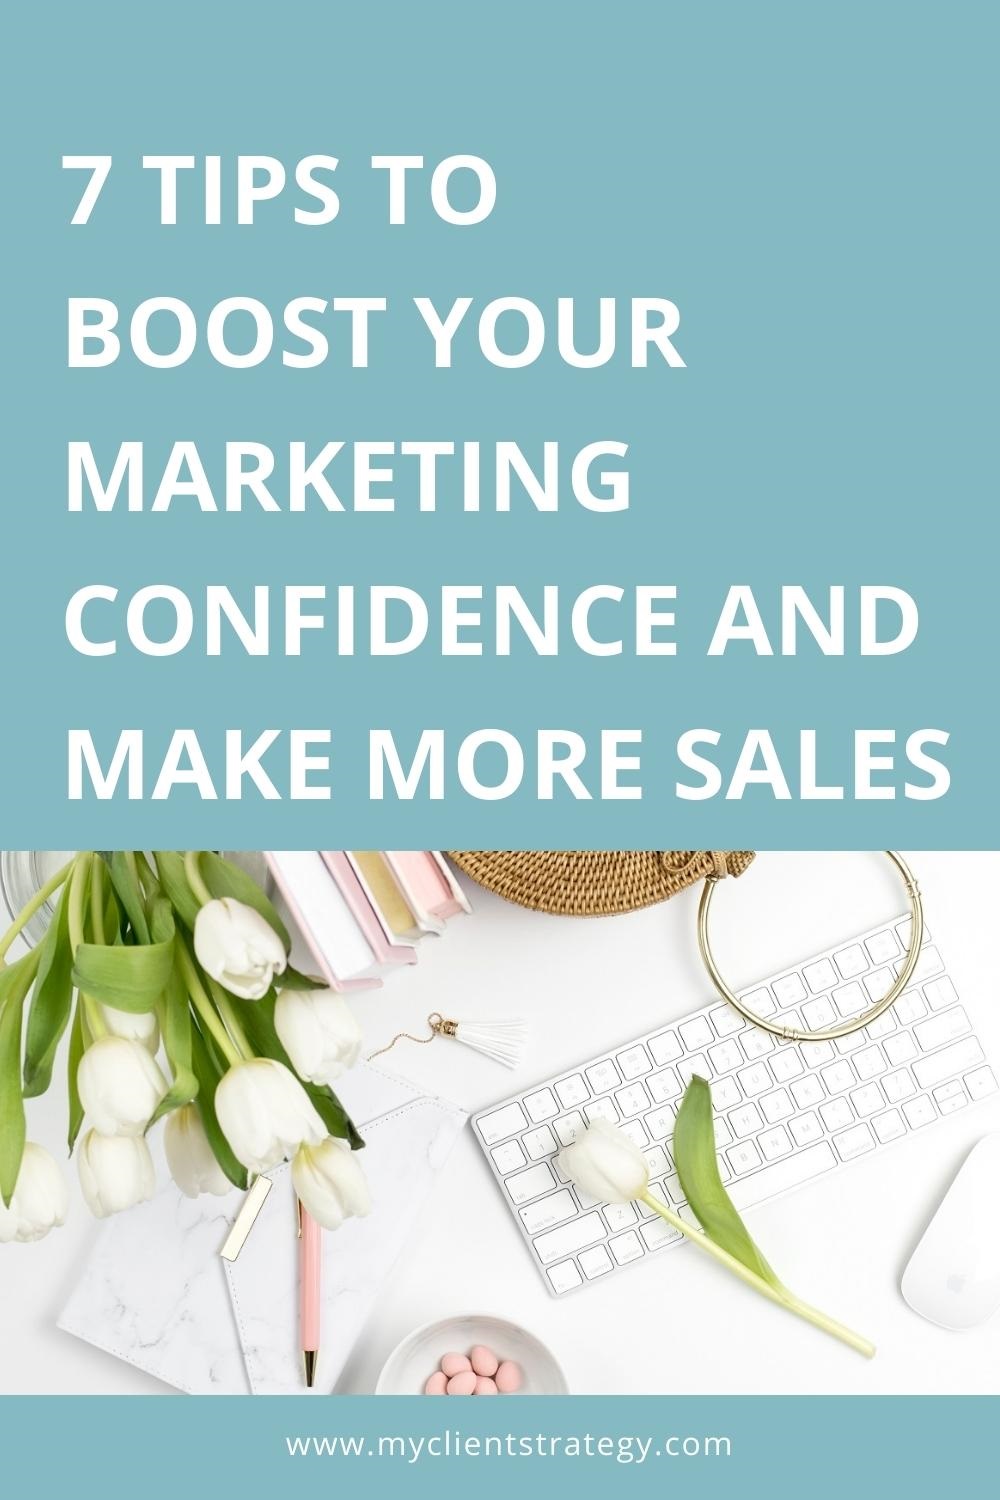 7 Tips to boost your marketing confidence and make more sales